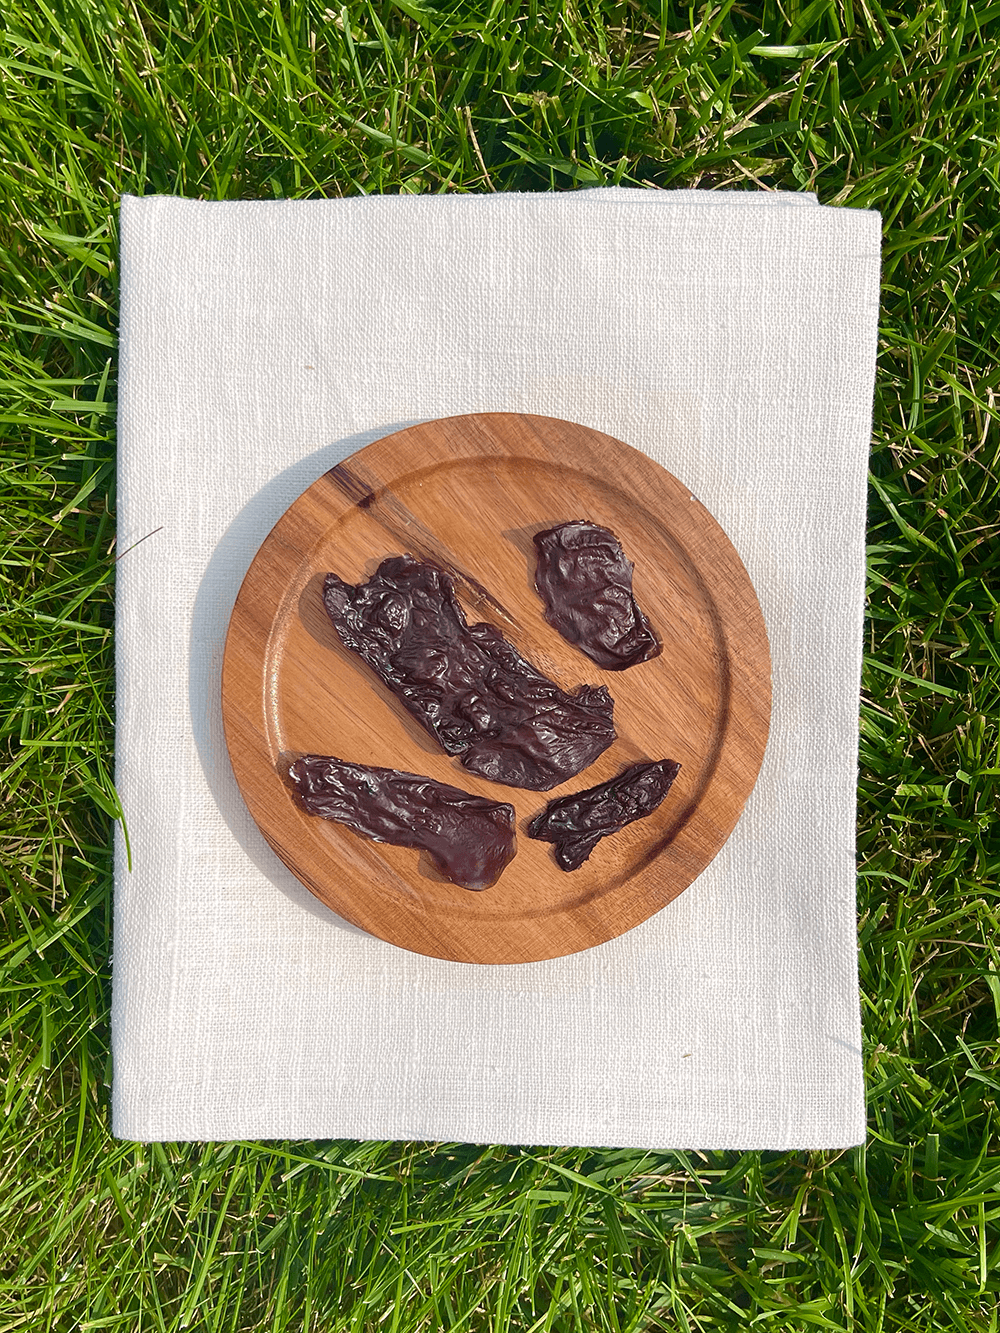 7825-chicken-liver-dehydrated-dog-treat.png